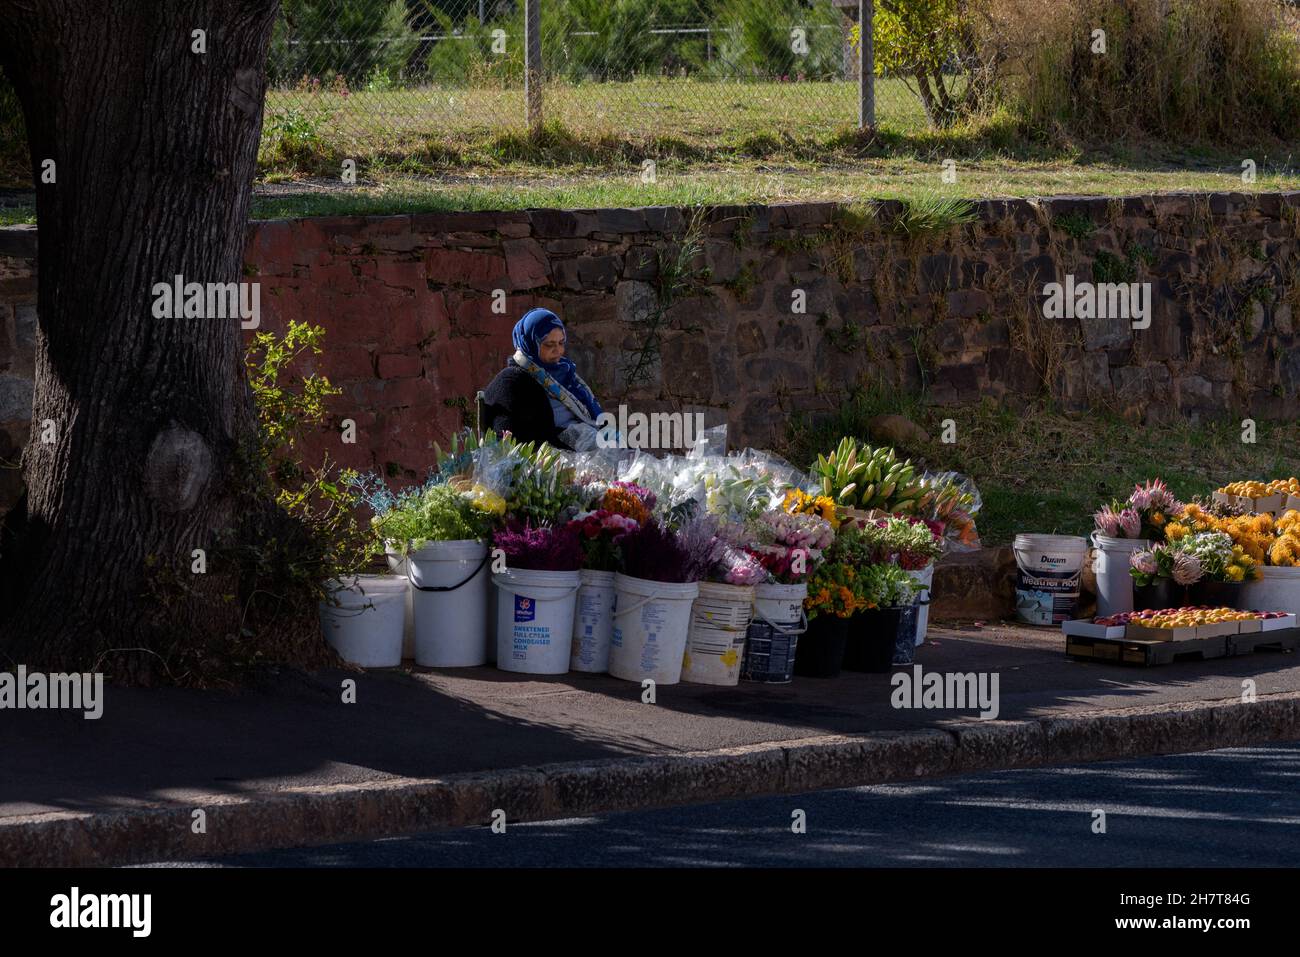 A cut flower seller in the South African city of Cape Town Stock Photo